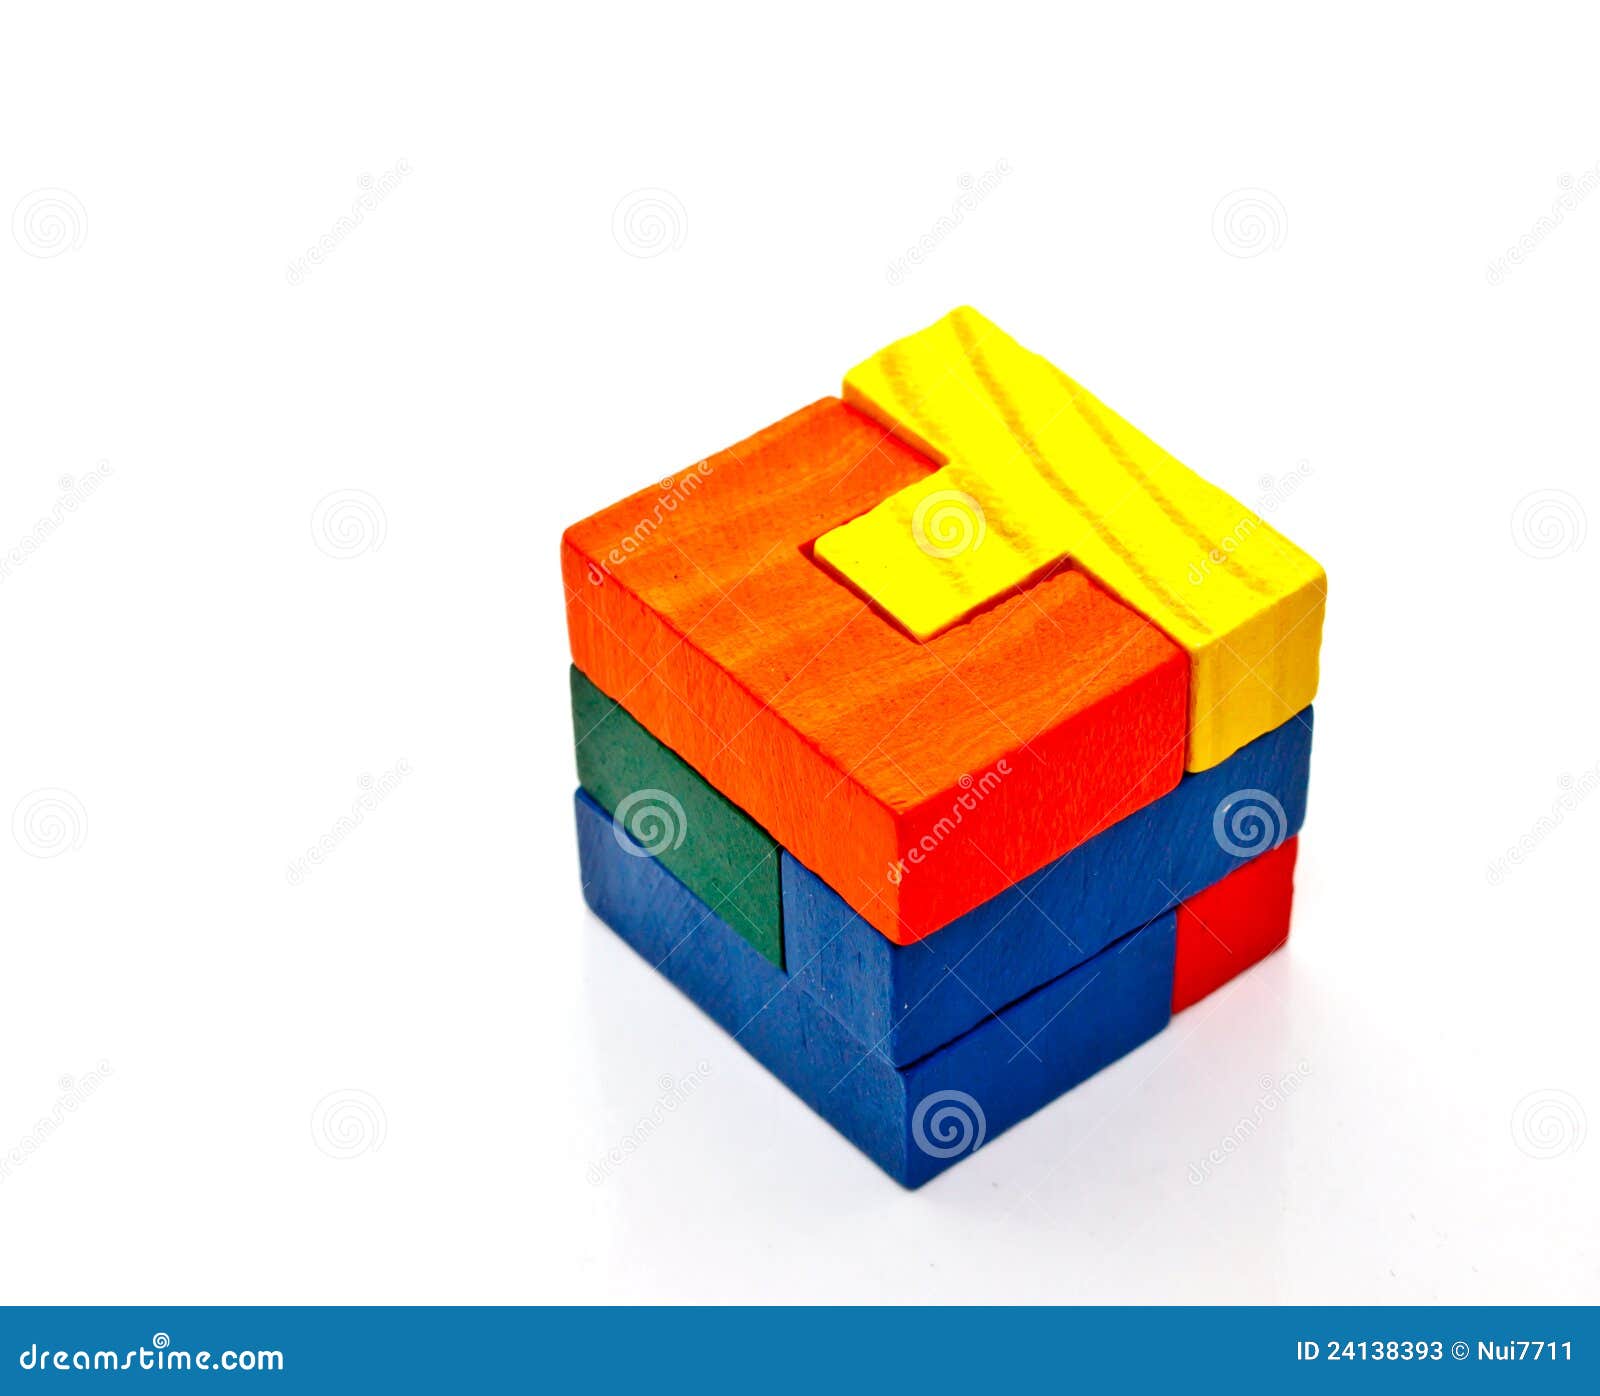 Colorful wooden jigsaw on white background.